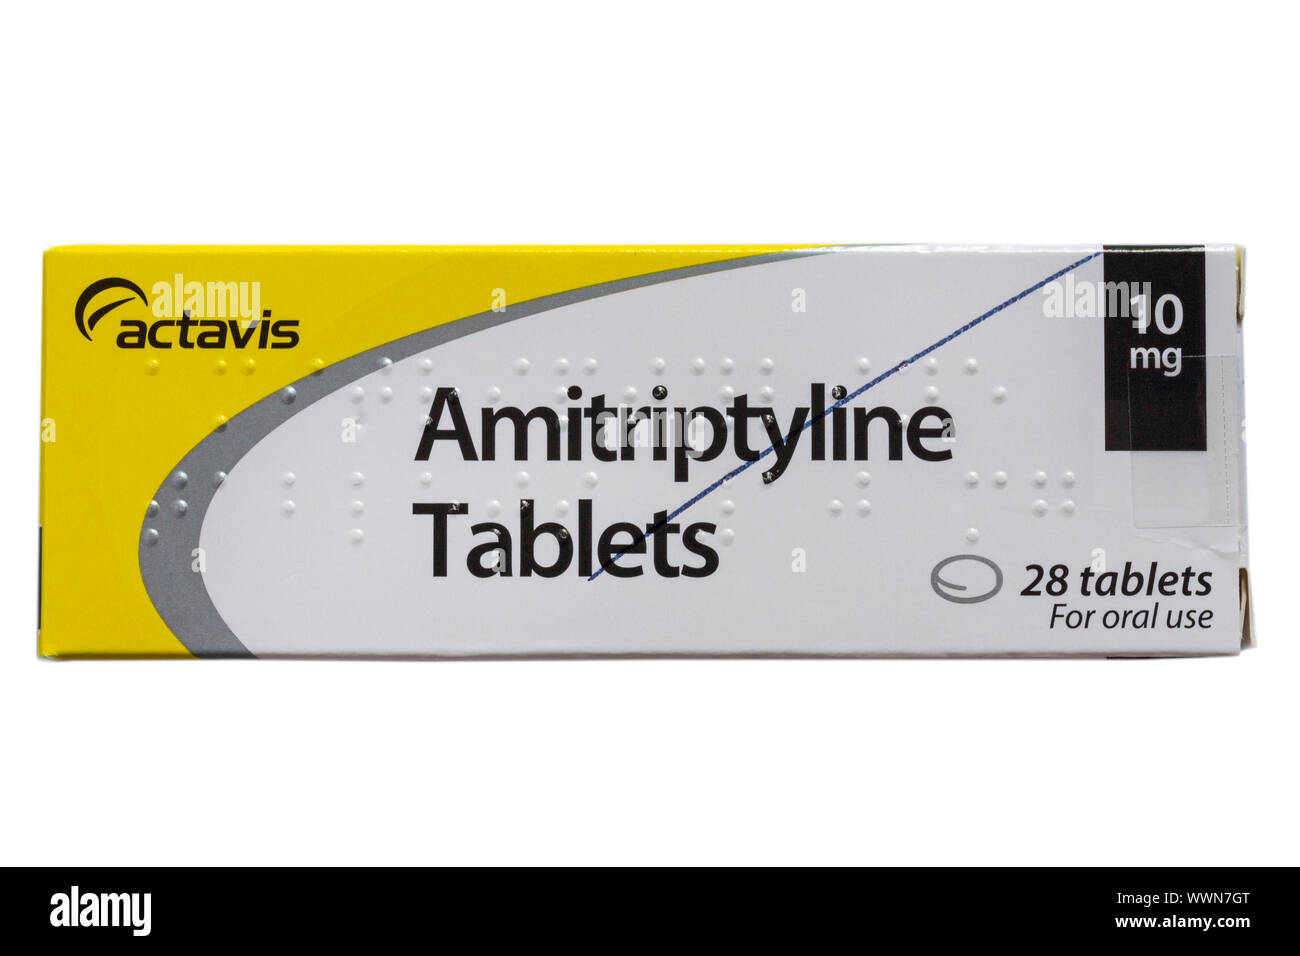 Pack of Amitriptyline Tablets by actavis - 28 tablets for oral use isolated on white background - antidepressant medicine Stock Photo